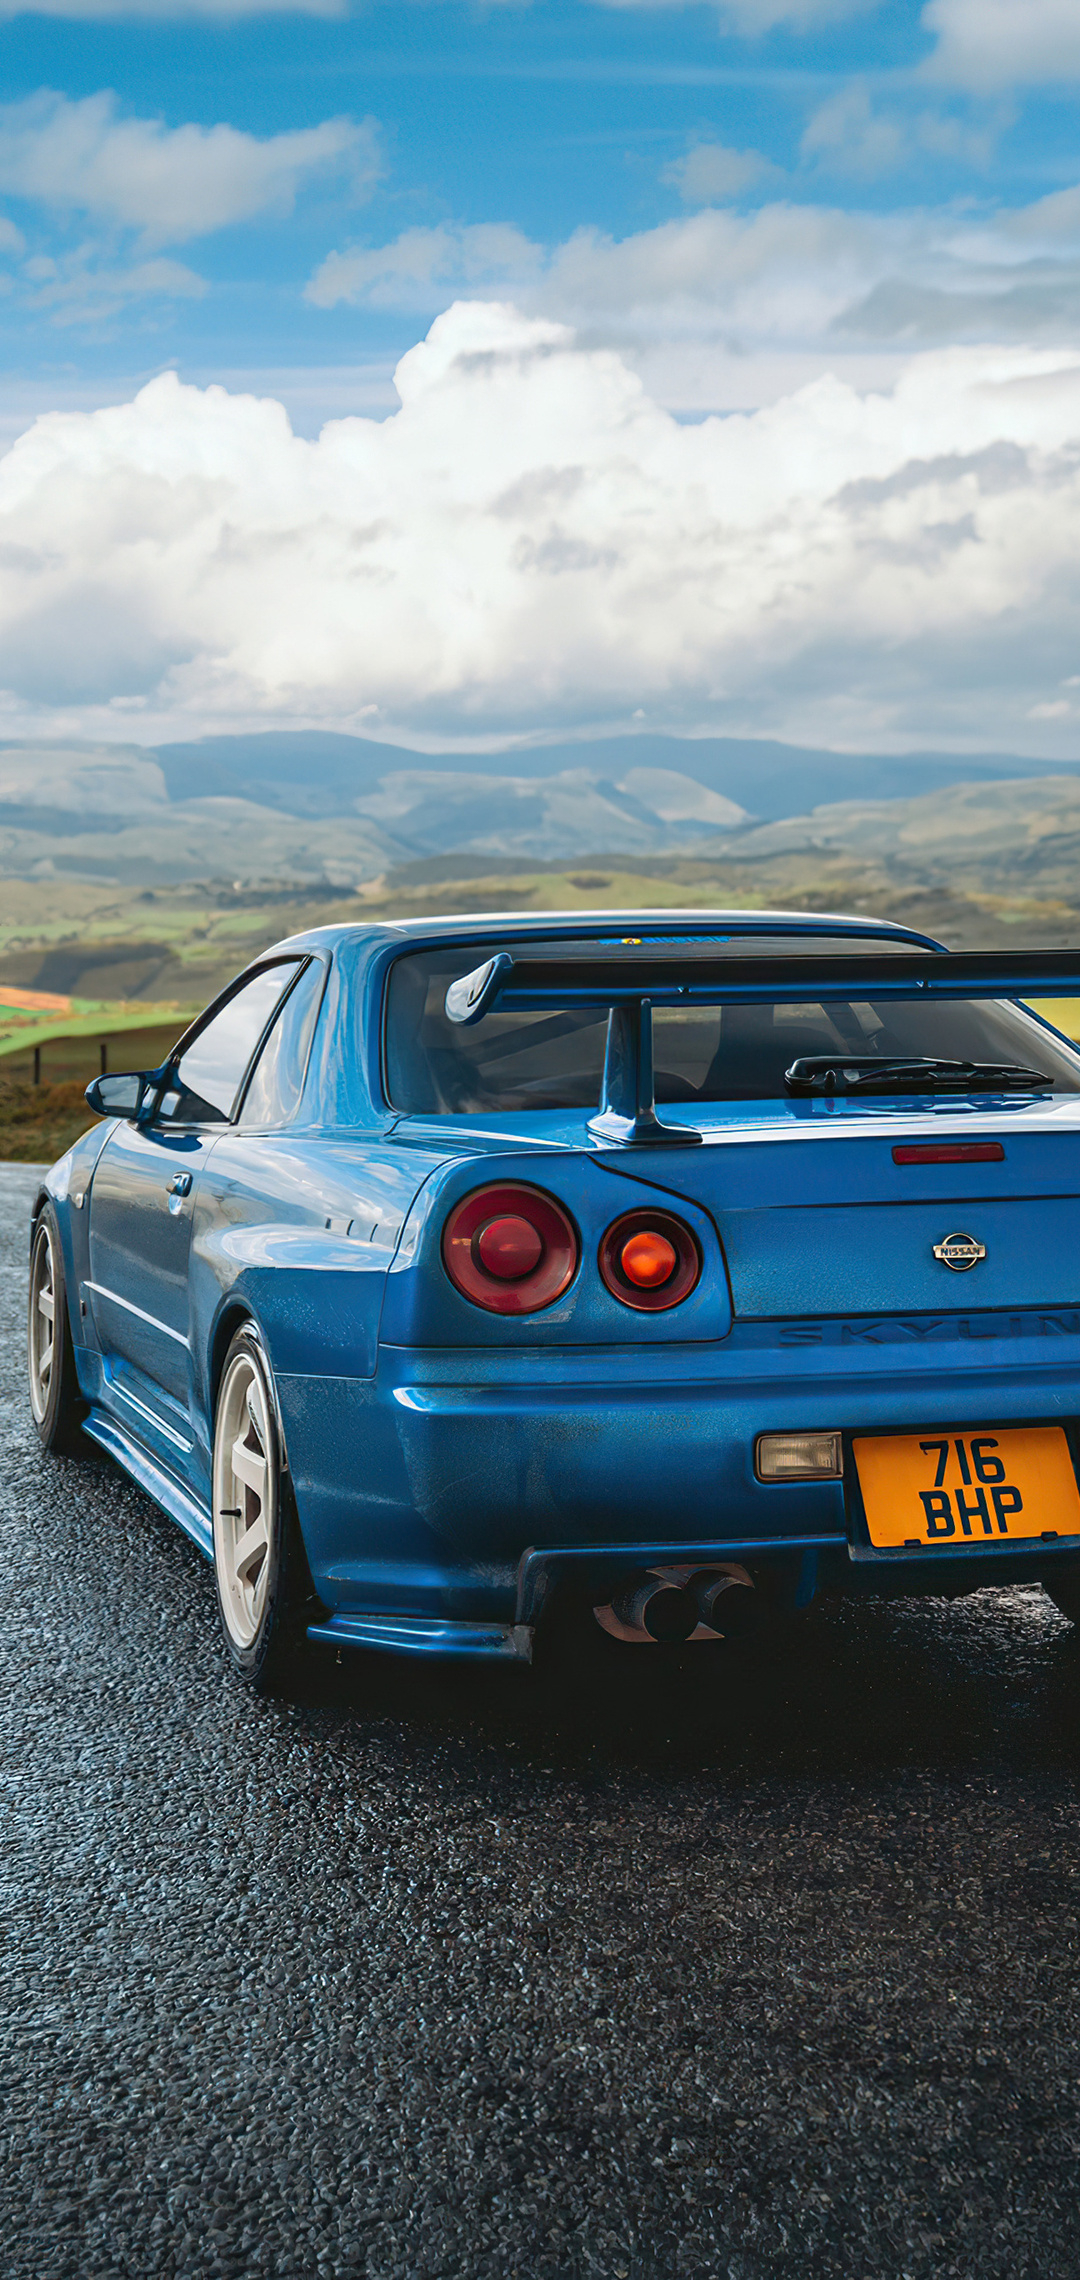 1080x2280 Nissan Skyline Gtr R34 One Plus 6,Huawei p20,Honor view 10,Vivo y85,Oppo f7,Xiaomi Mi A2 HD 4k Wallpapers, Images, Backgrounds, Photos and Pictures